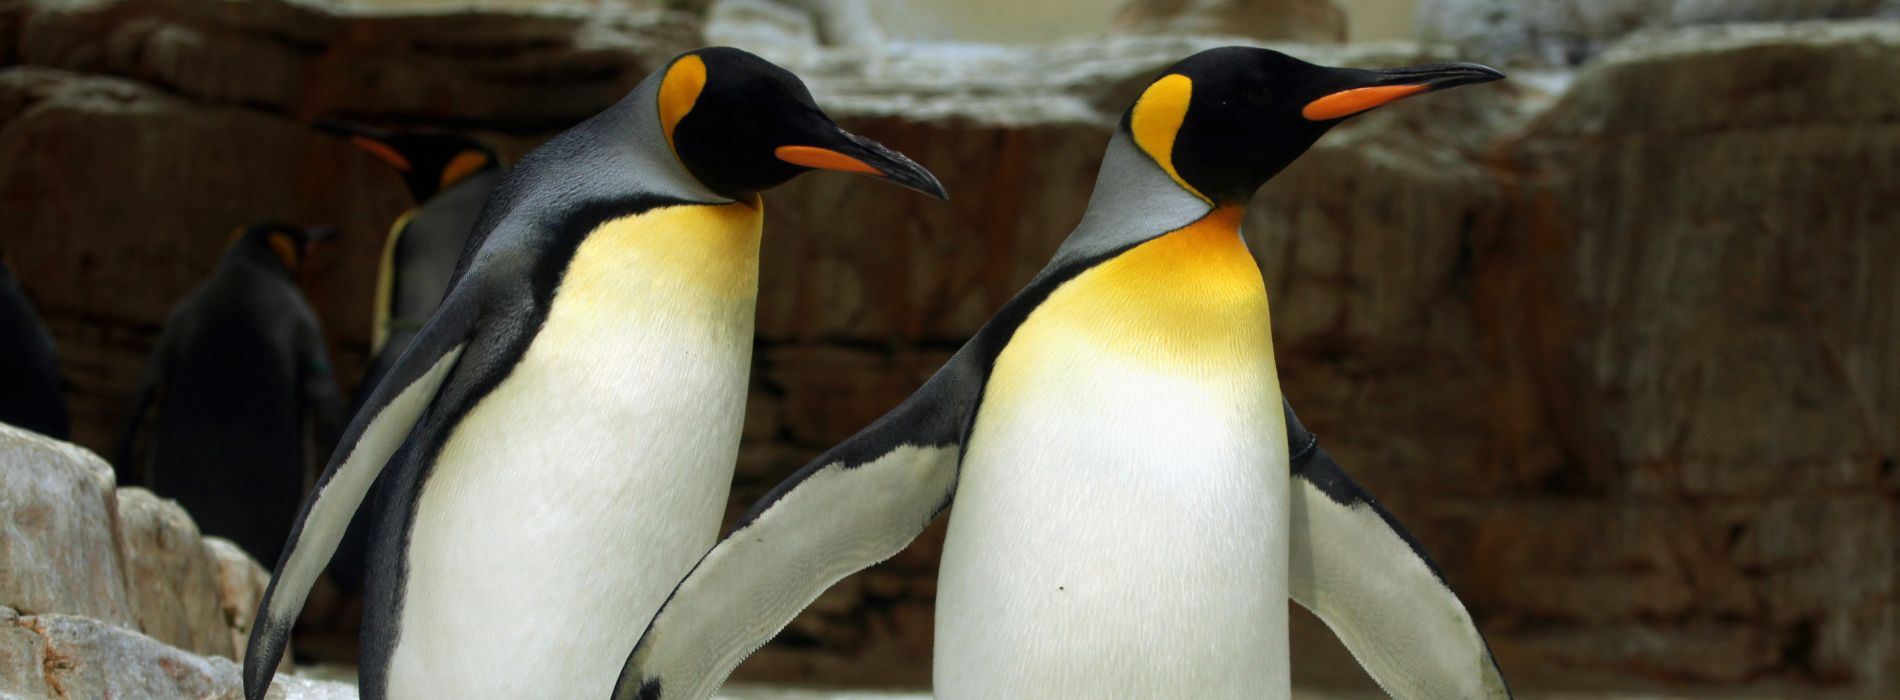 King Penguin Biography: The Majestic Ruler of the Antarctic